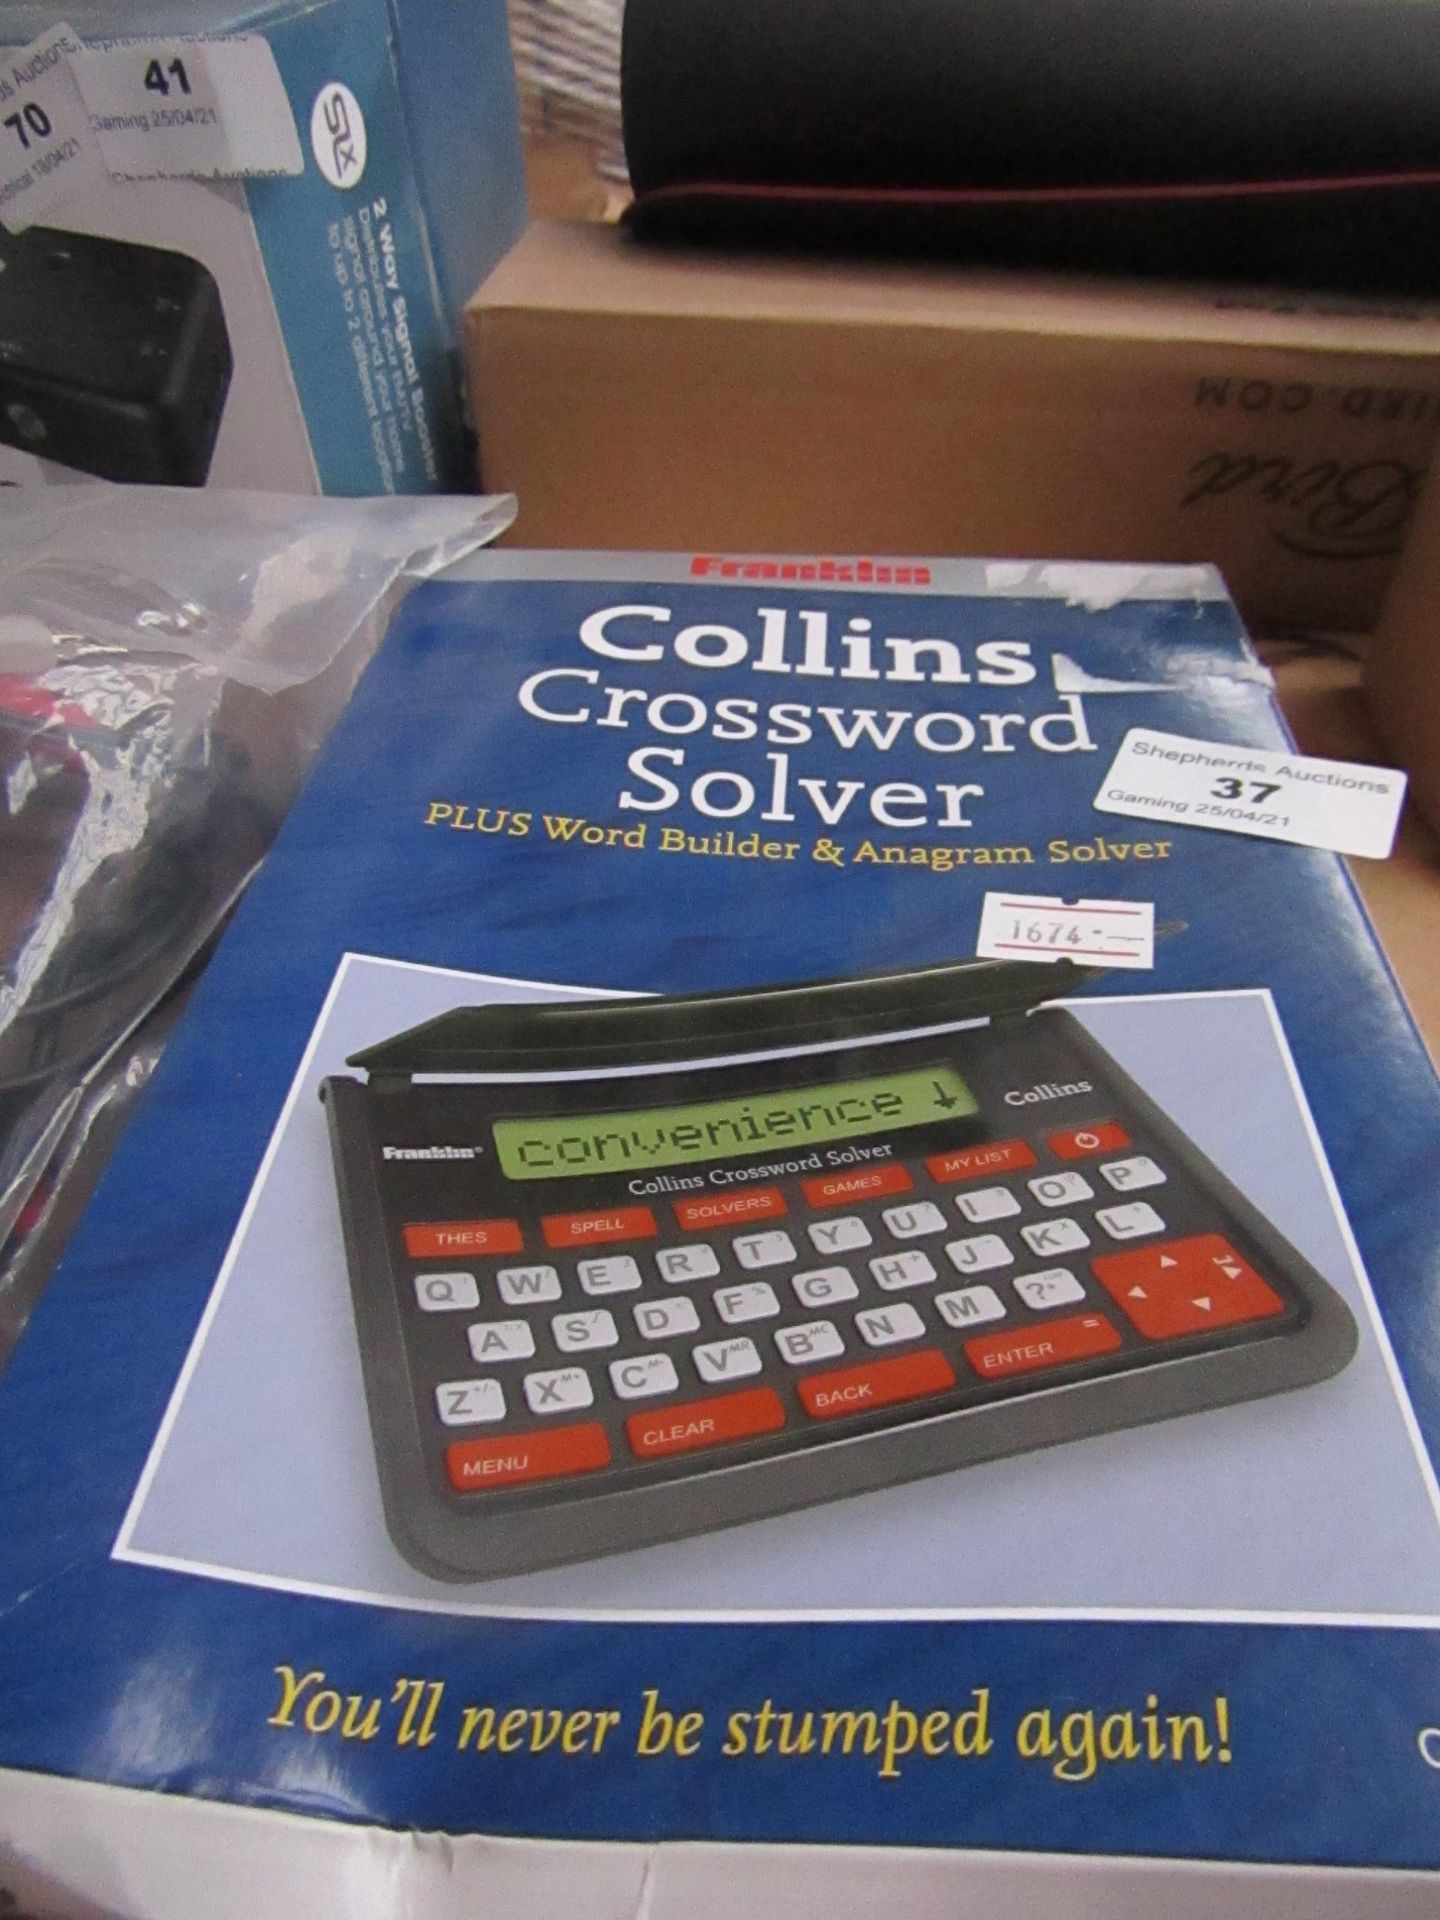 Franklin Collins crossword solver, unchecked and boxed.